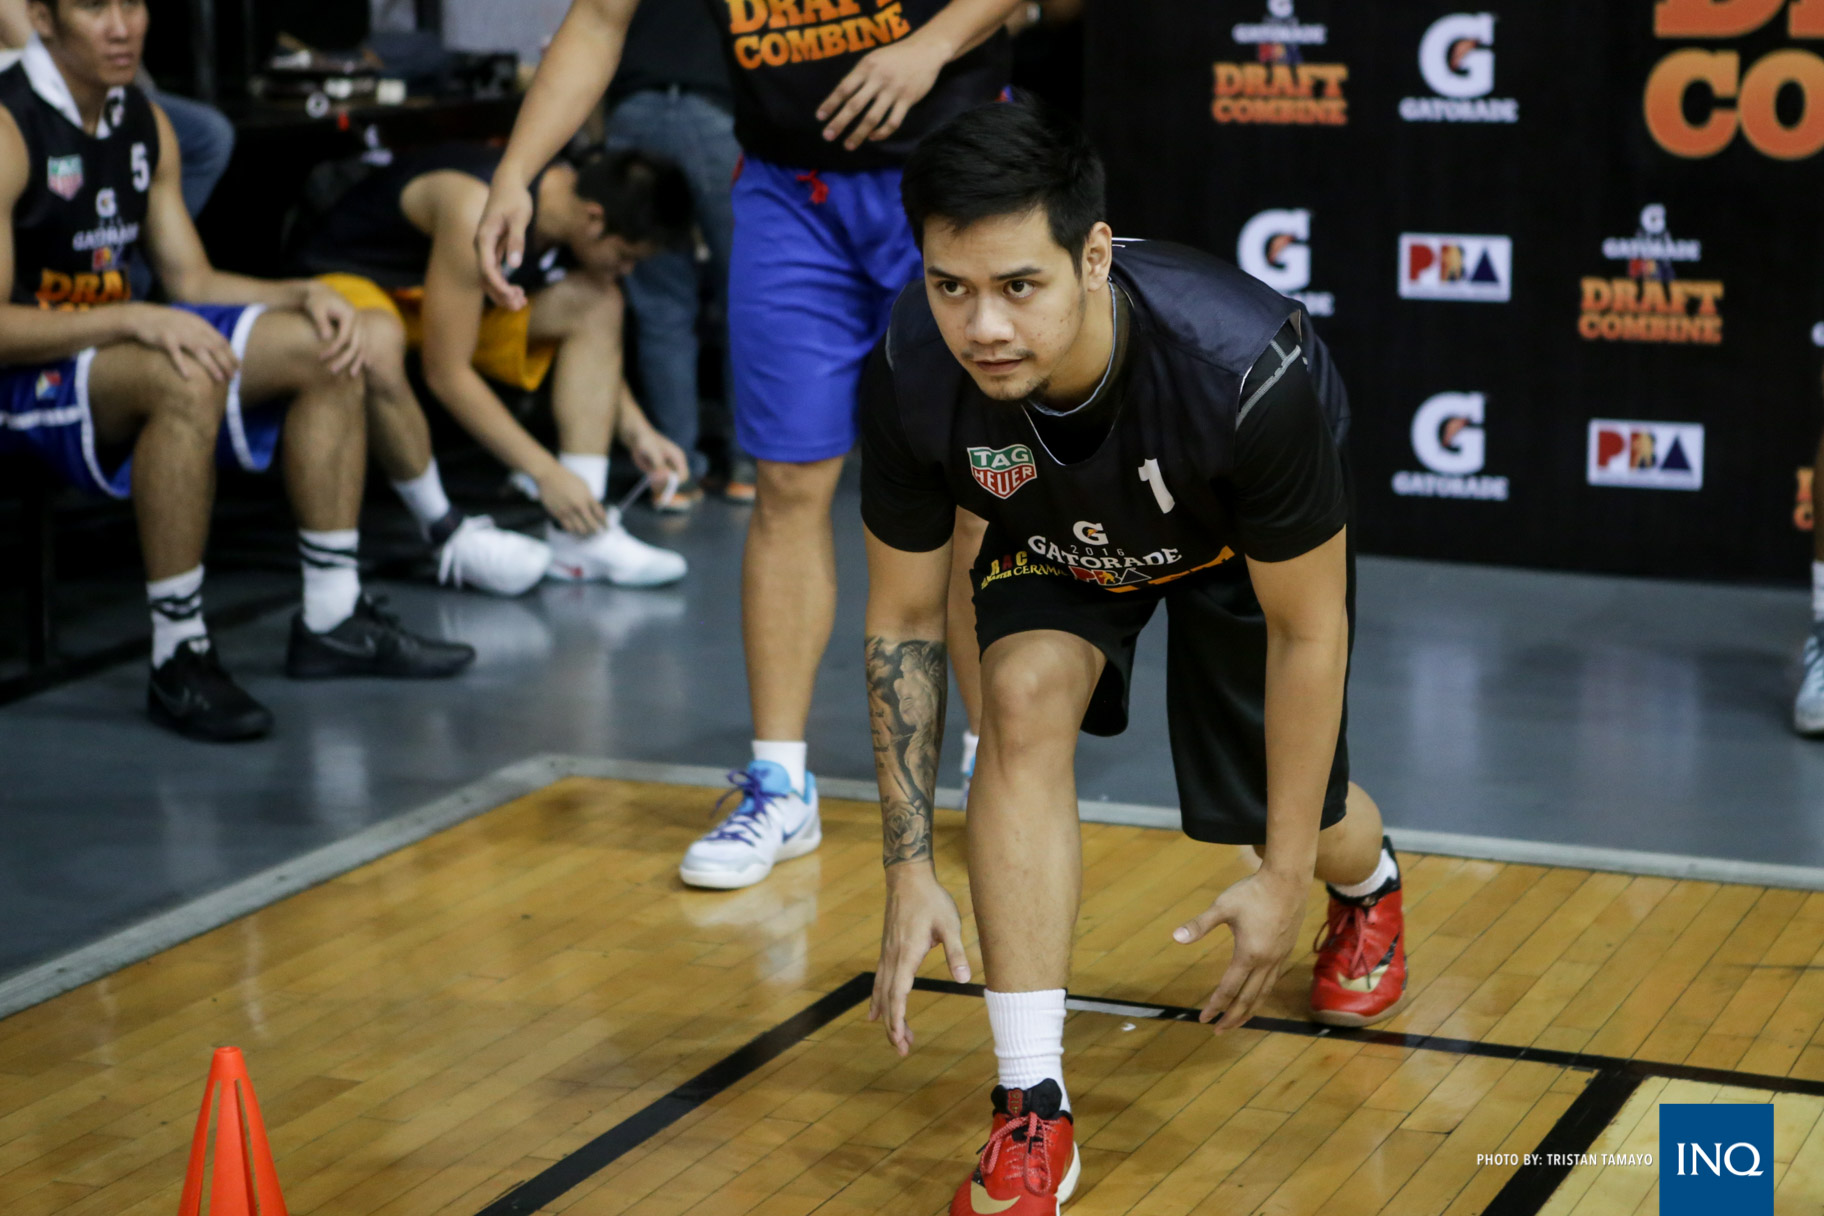 Jamil Ourtouste goes through a drill at the 2016 PBA Rookie Draft Combine. Photo by Tristan Tamayo/INQUIRER.net